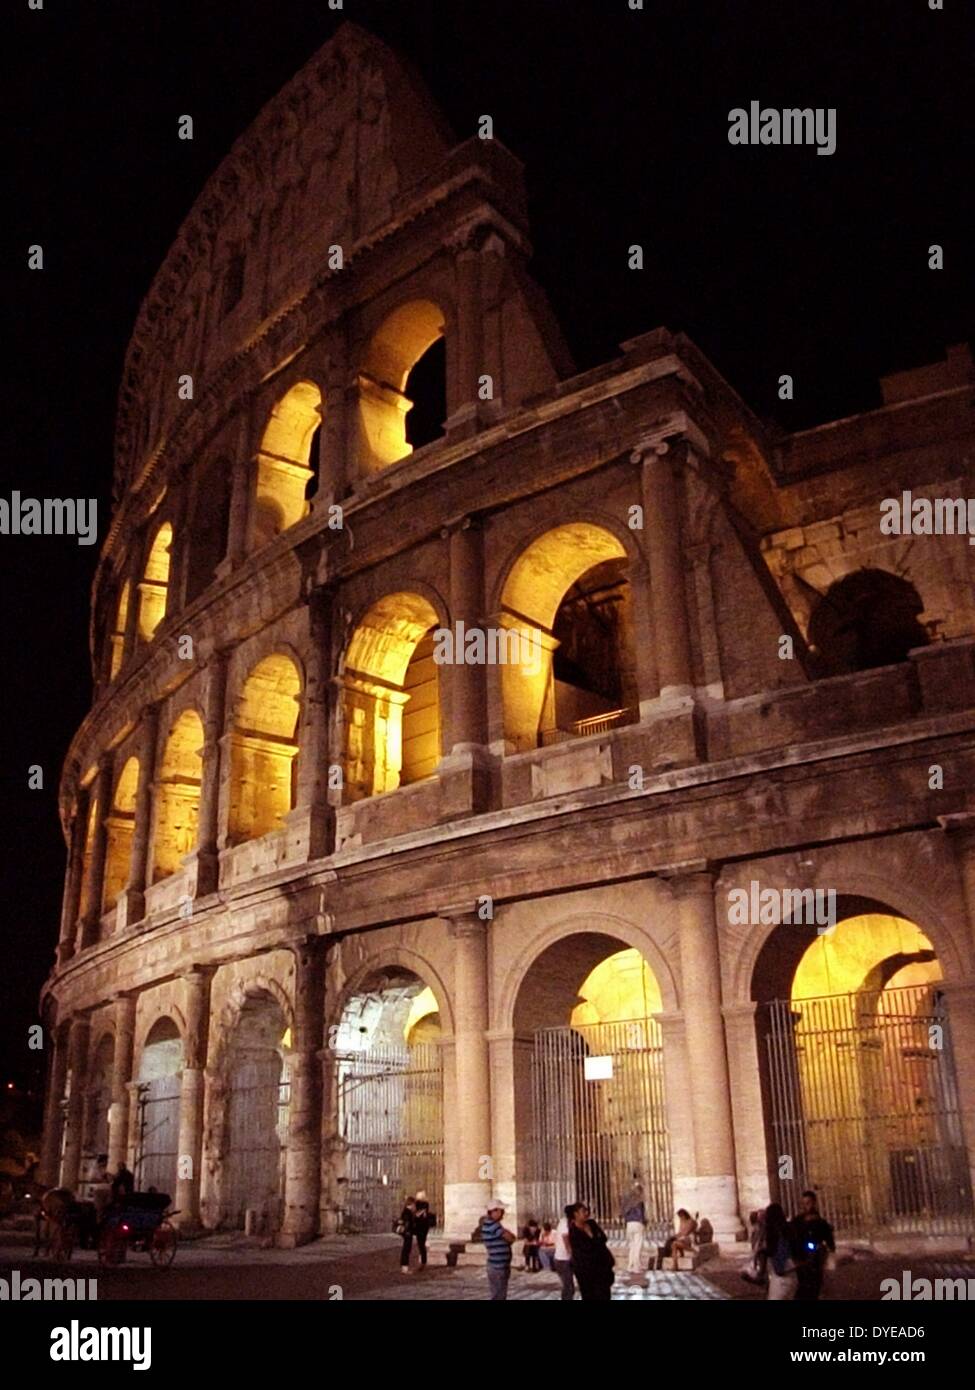 Night time view of the Colosseum, an elliptical amphitheatre in the centre of the city of Rome. Built 70-80 AD. Rome. Italy 2013 Stock Photo